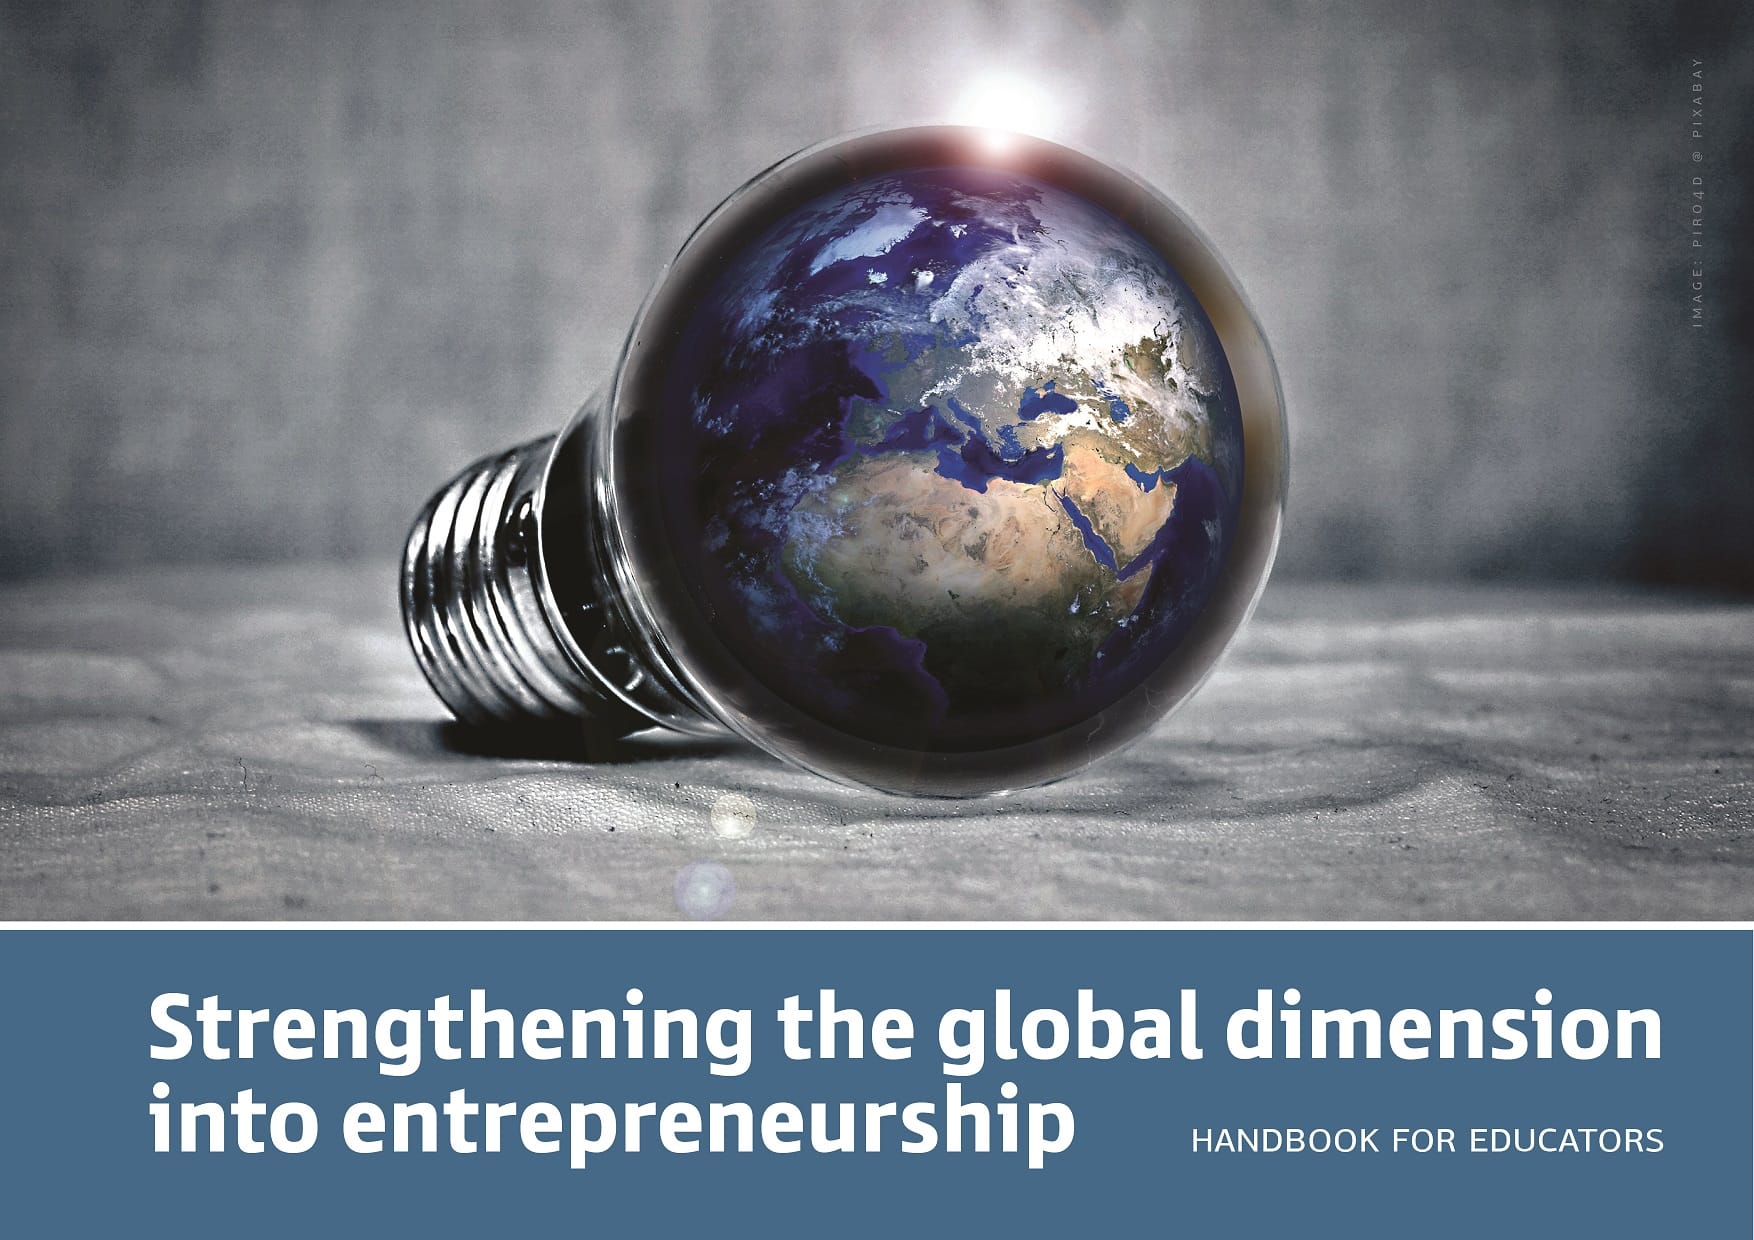 How to bring a global dimension to entrepreneurship?